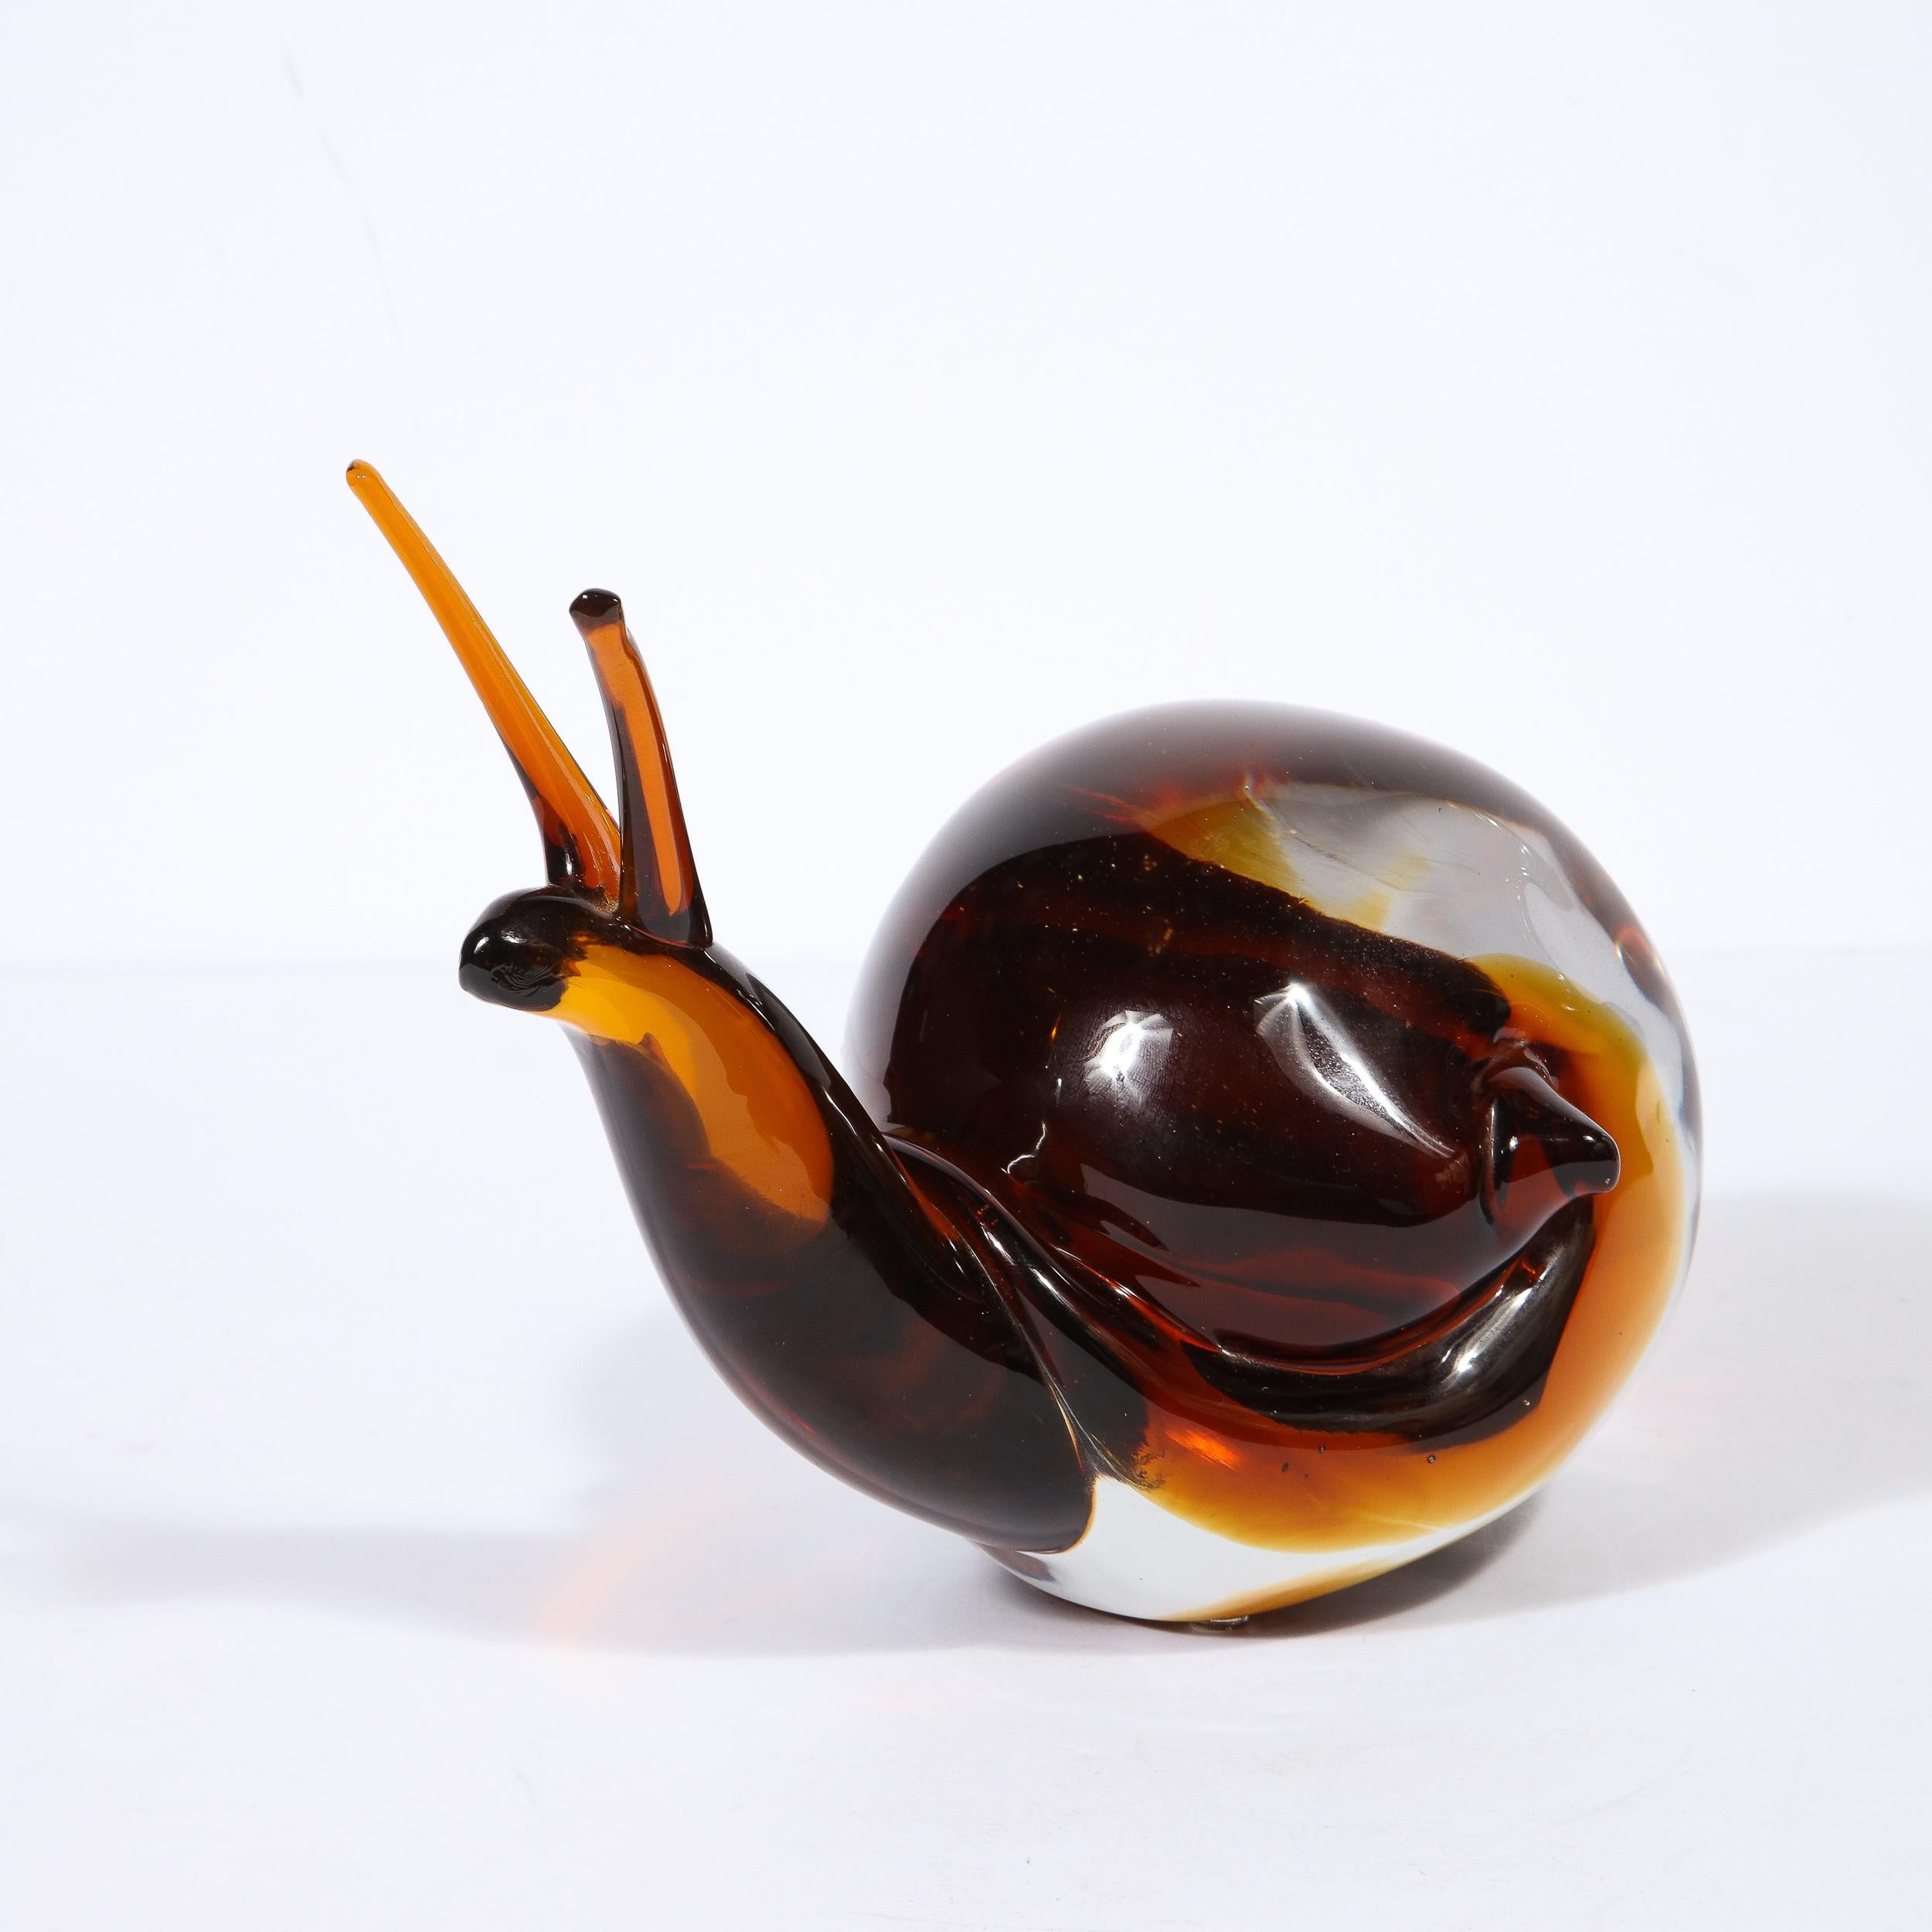 This sophisticated and whimsical glass snail sculpture was realized in Murano, Italy- the island off the coast of Venice renowned for centuries for its superlative glass production, circa 1970 by the esteemed 20th Century artist Licio Zanetti. Here,